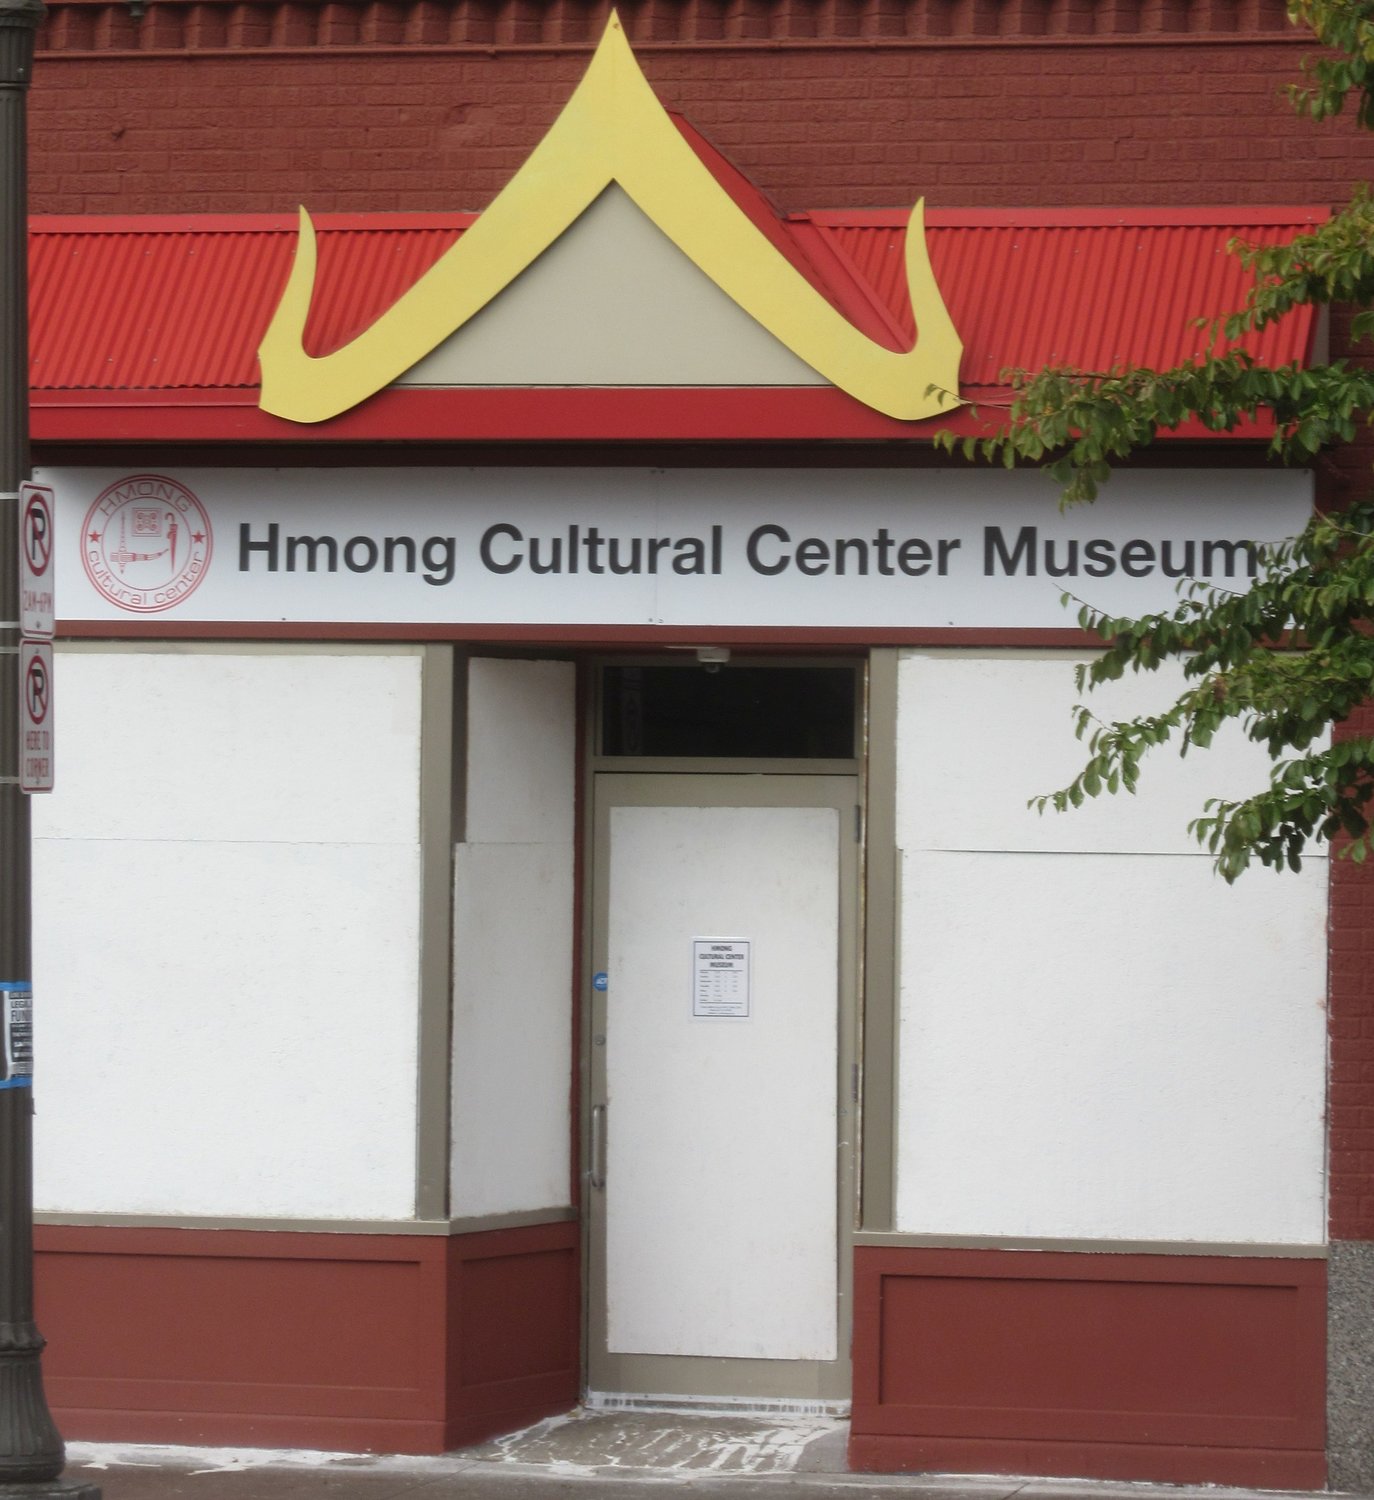 The opening of the expanded museum at 375 University Ave. was delayed due to vandalism in September. (Photo submitted)